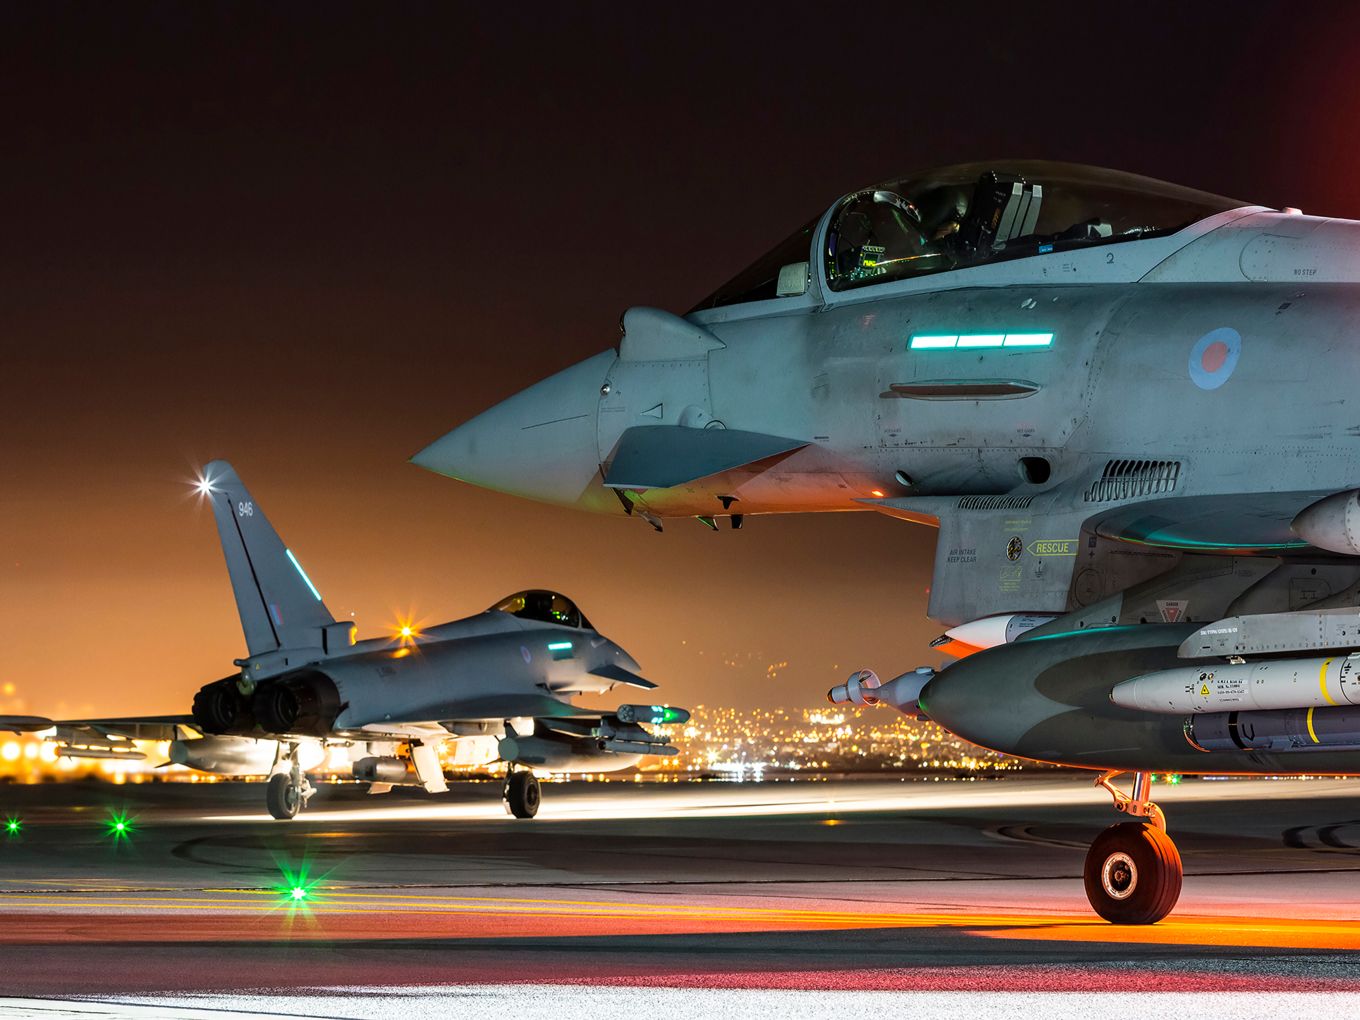 Two typhoons on the airfield at night, with lights.